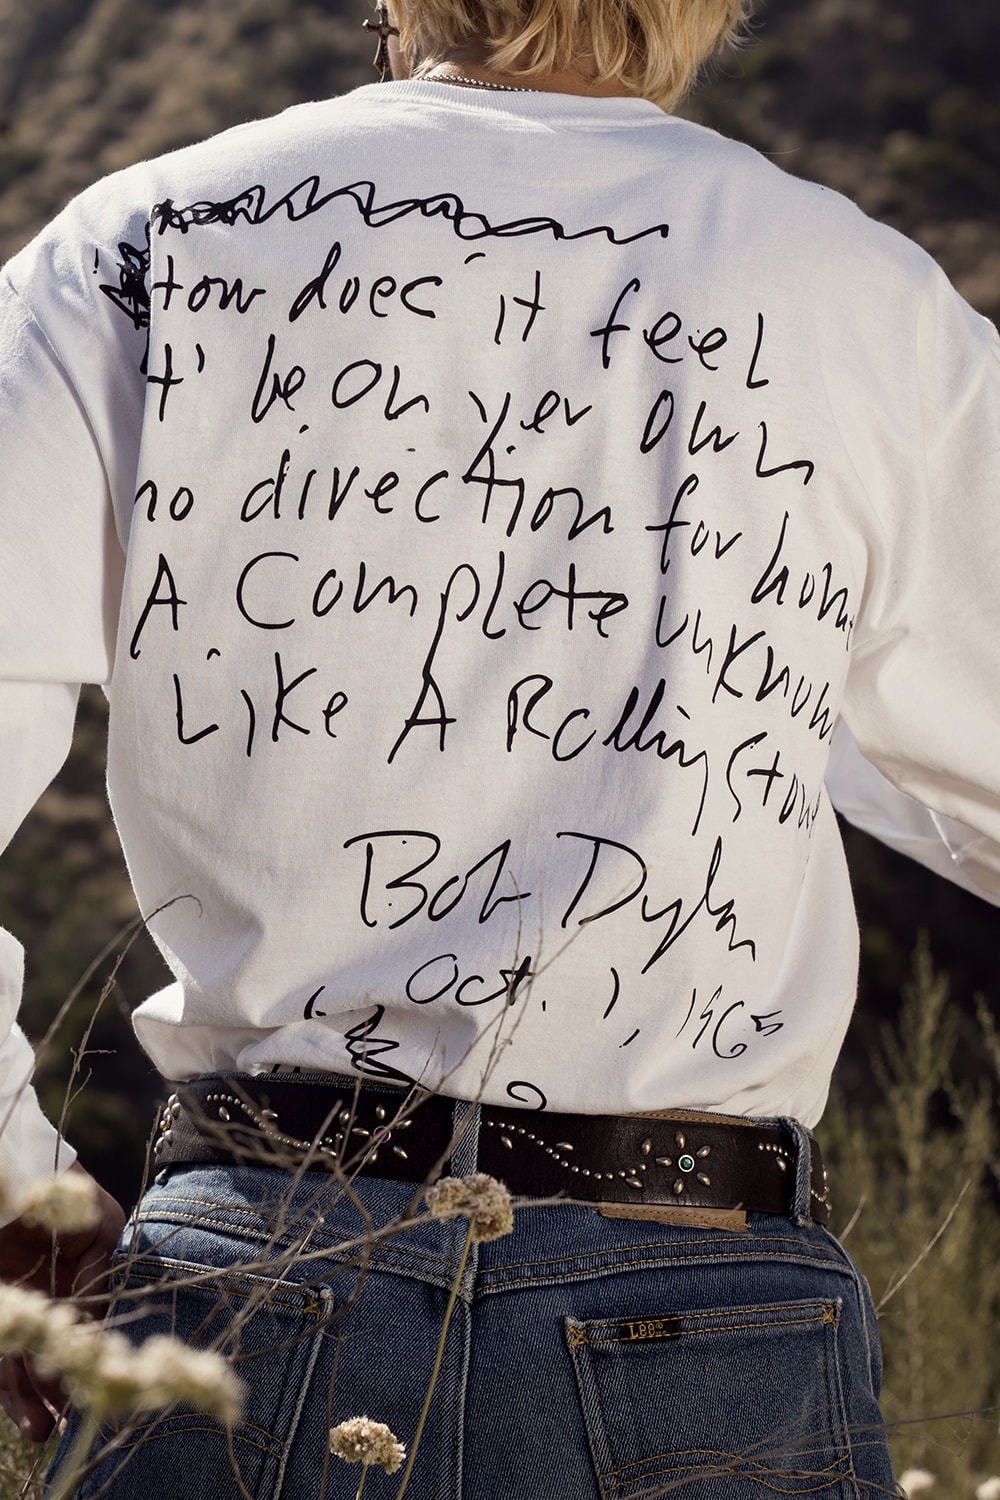 Bob Dylan x Pleasures Capsule Collection Lookbook graphic t-shirts hats hoodie sweatshirts shirts release info price drop date sony music